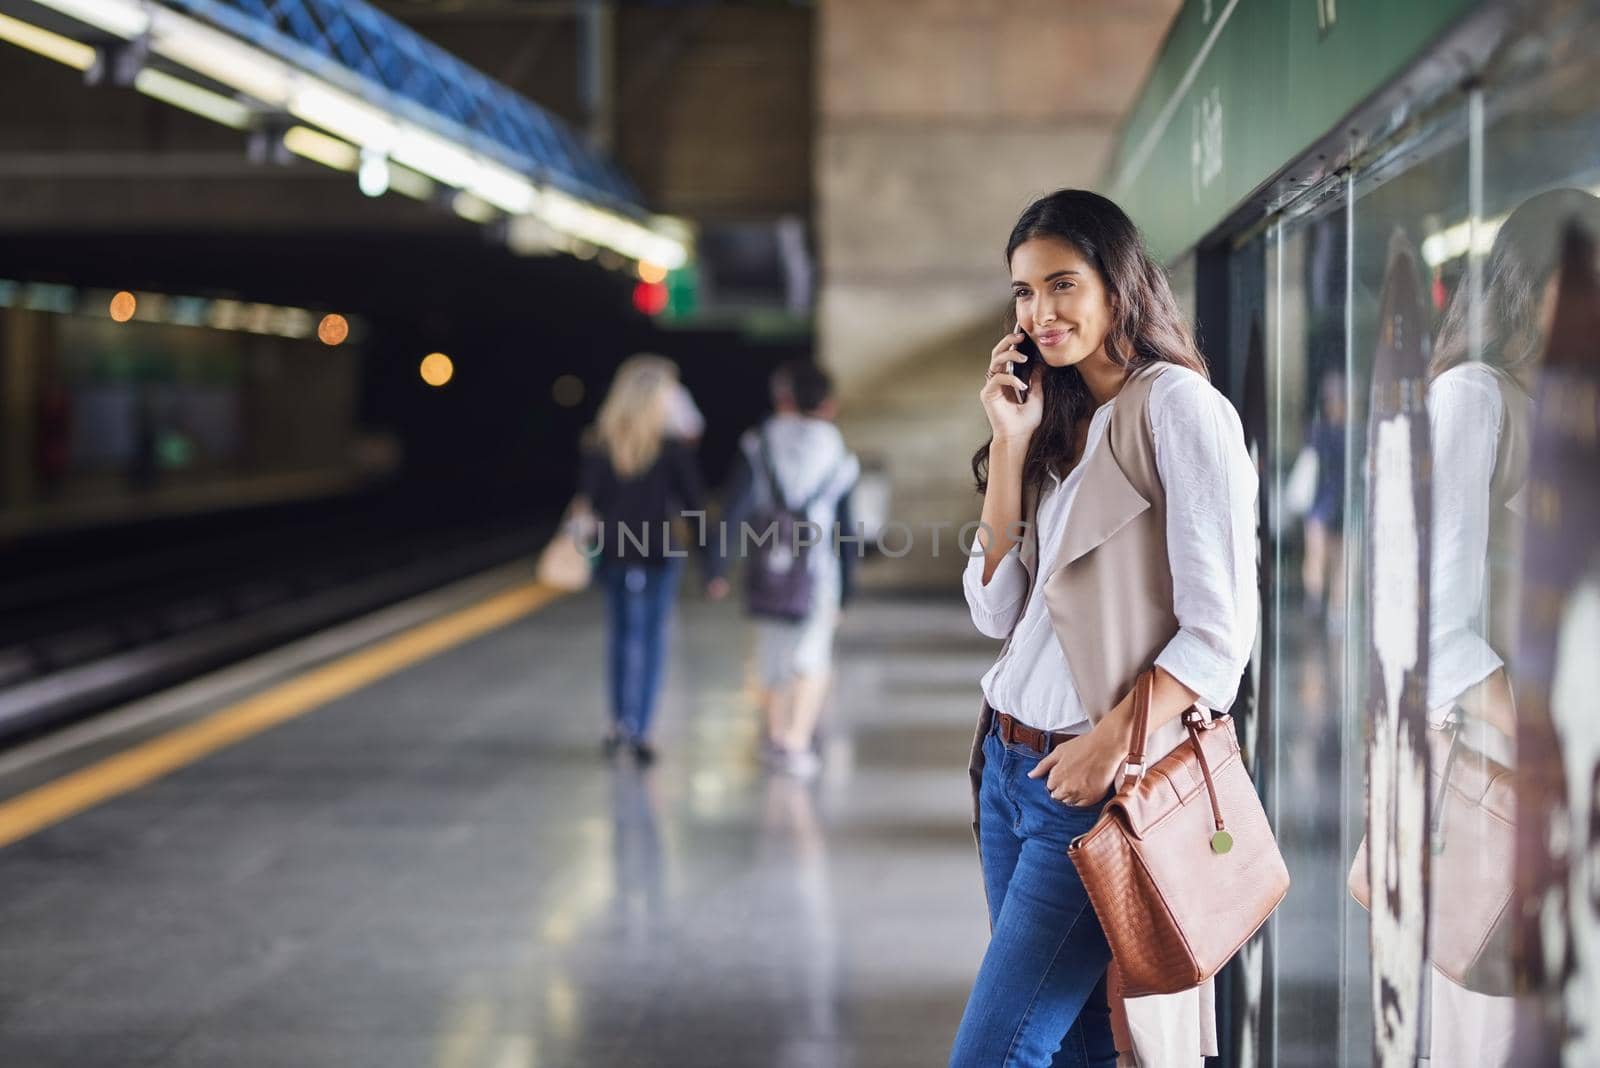 Cropped shot of a young attractive woman on a call and using the train to commute.